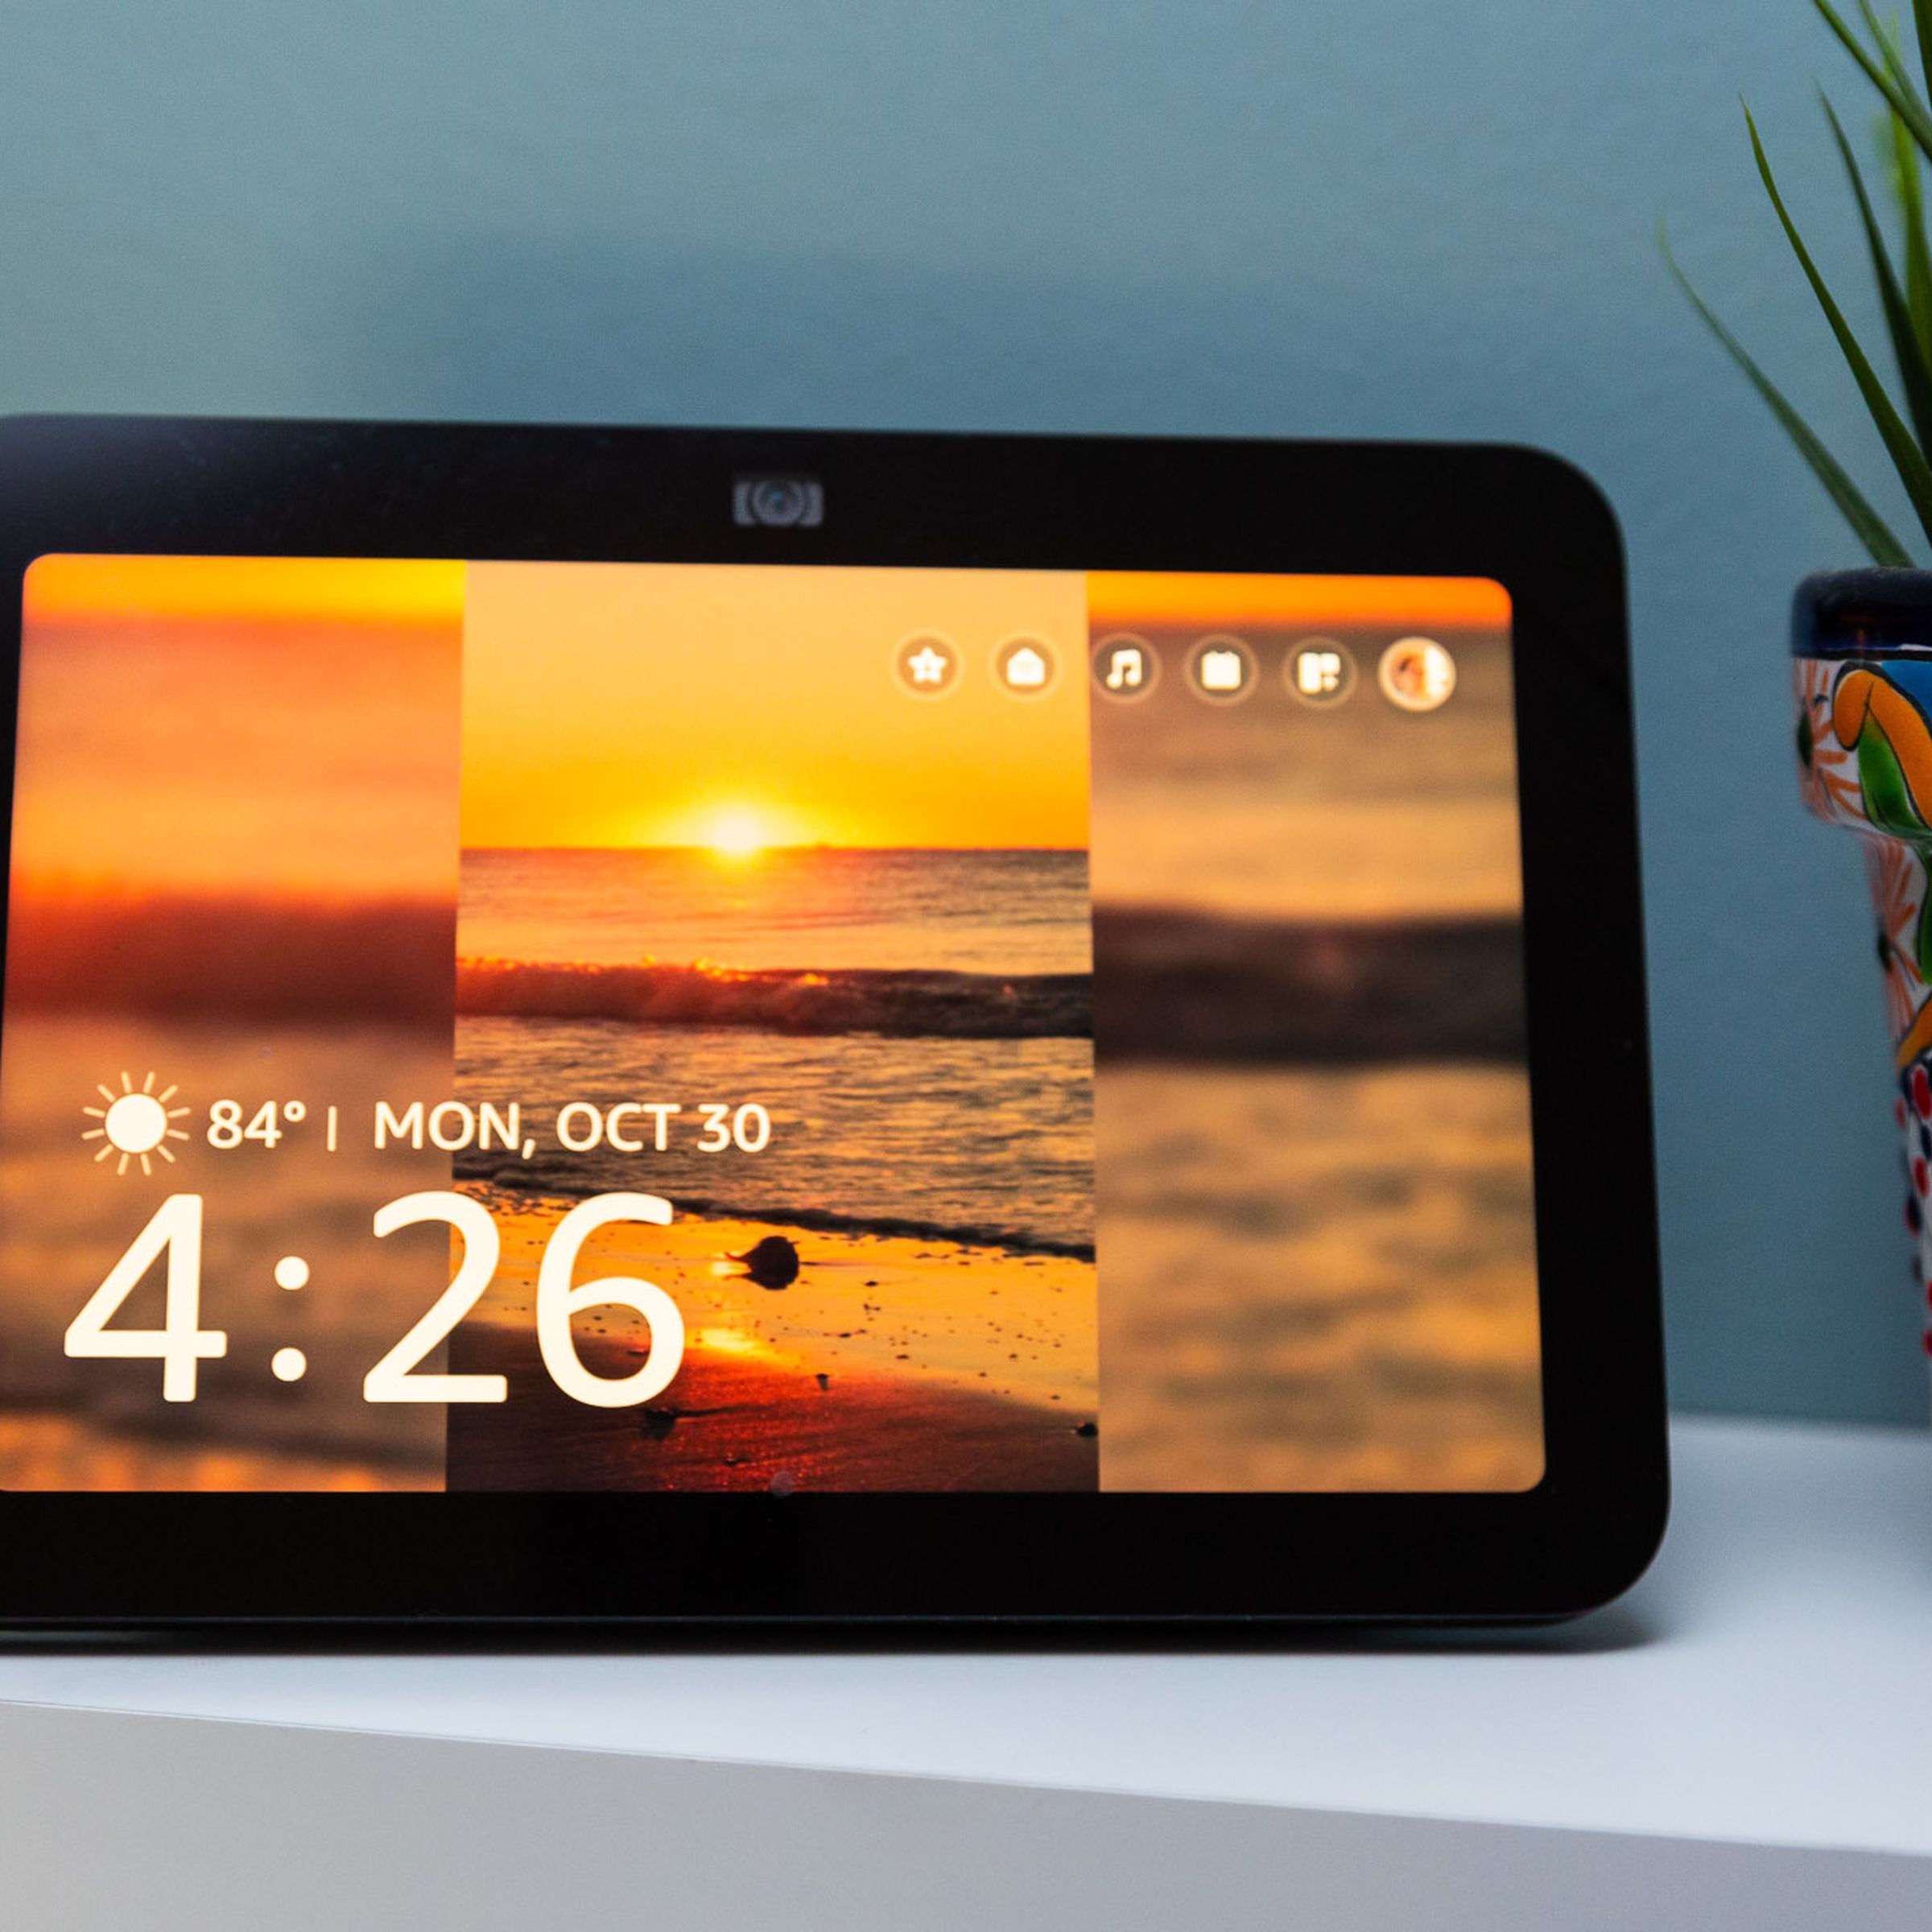 The third-generation Echo Show facing the camera with its display on and four widgets up in the top right corner.